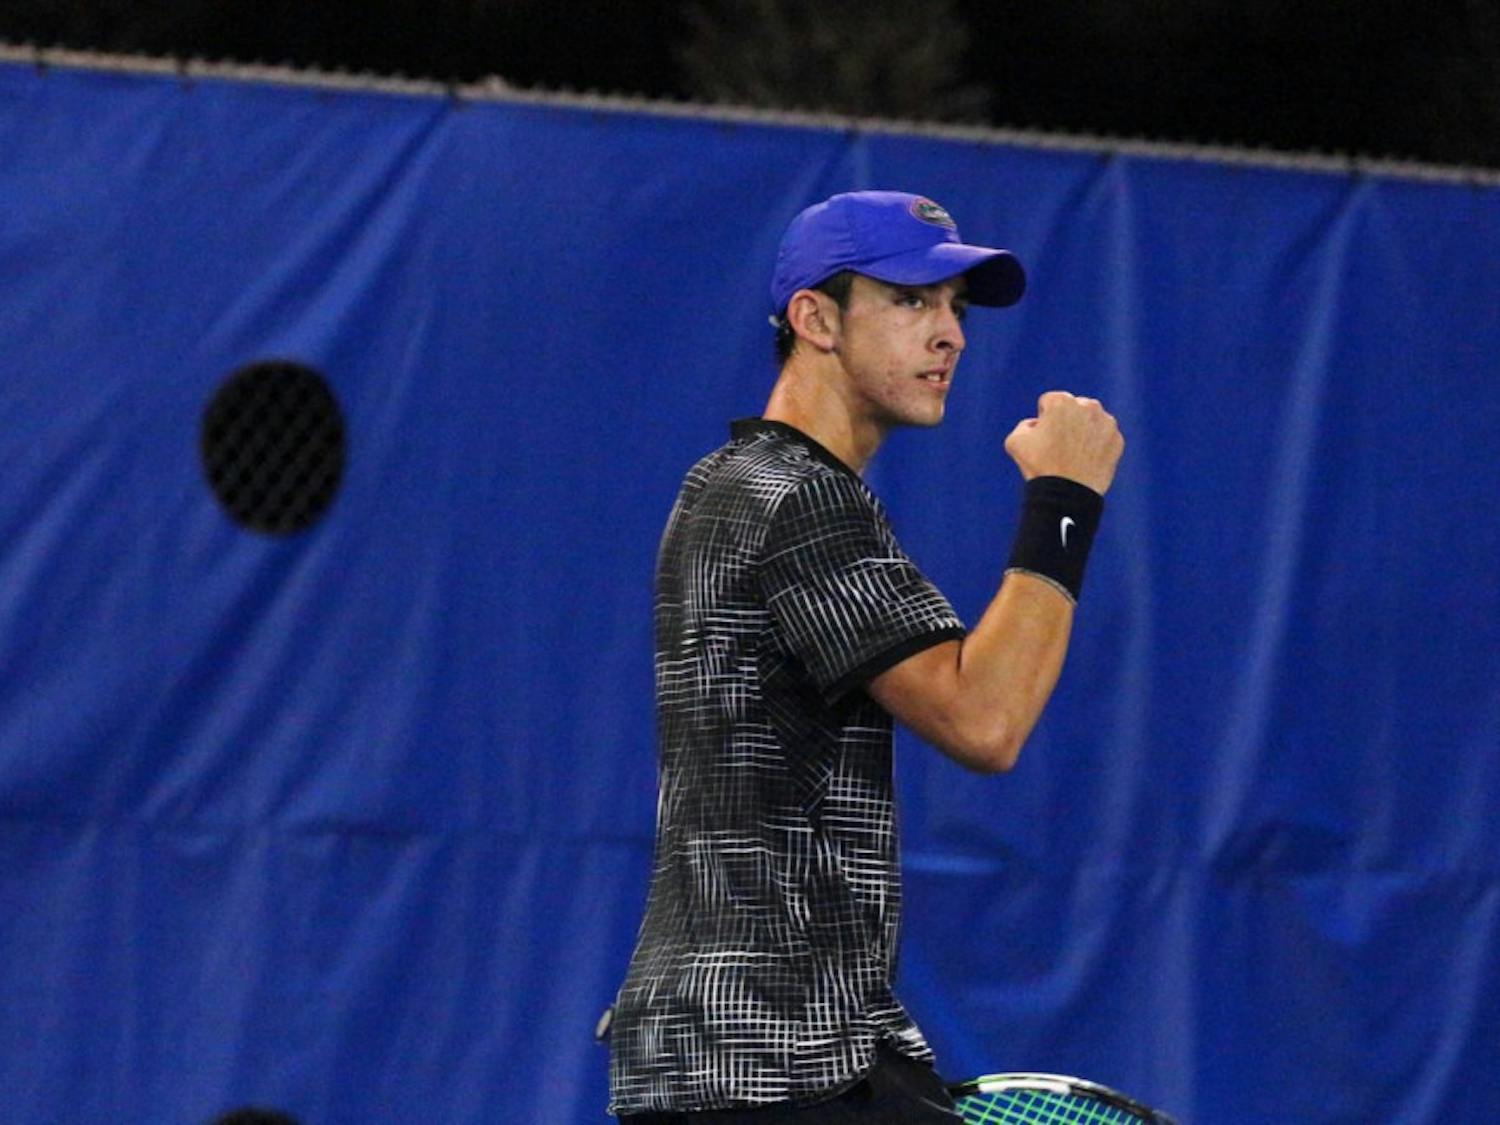 Sophomore Andy&nbsp;Andrade topped Zeke Clark in straight sets (6-2, 6-4) in Florida's 6-1 win over Illinois.